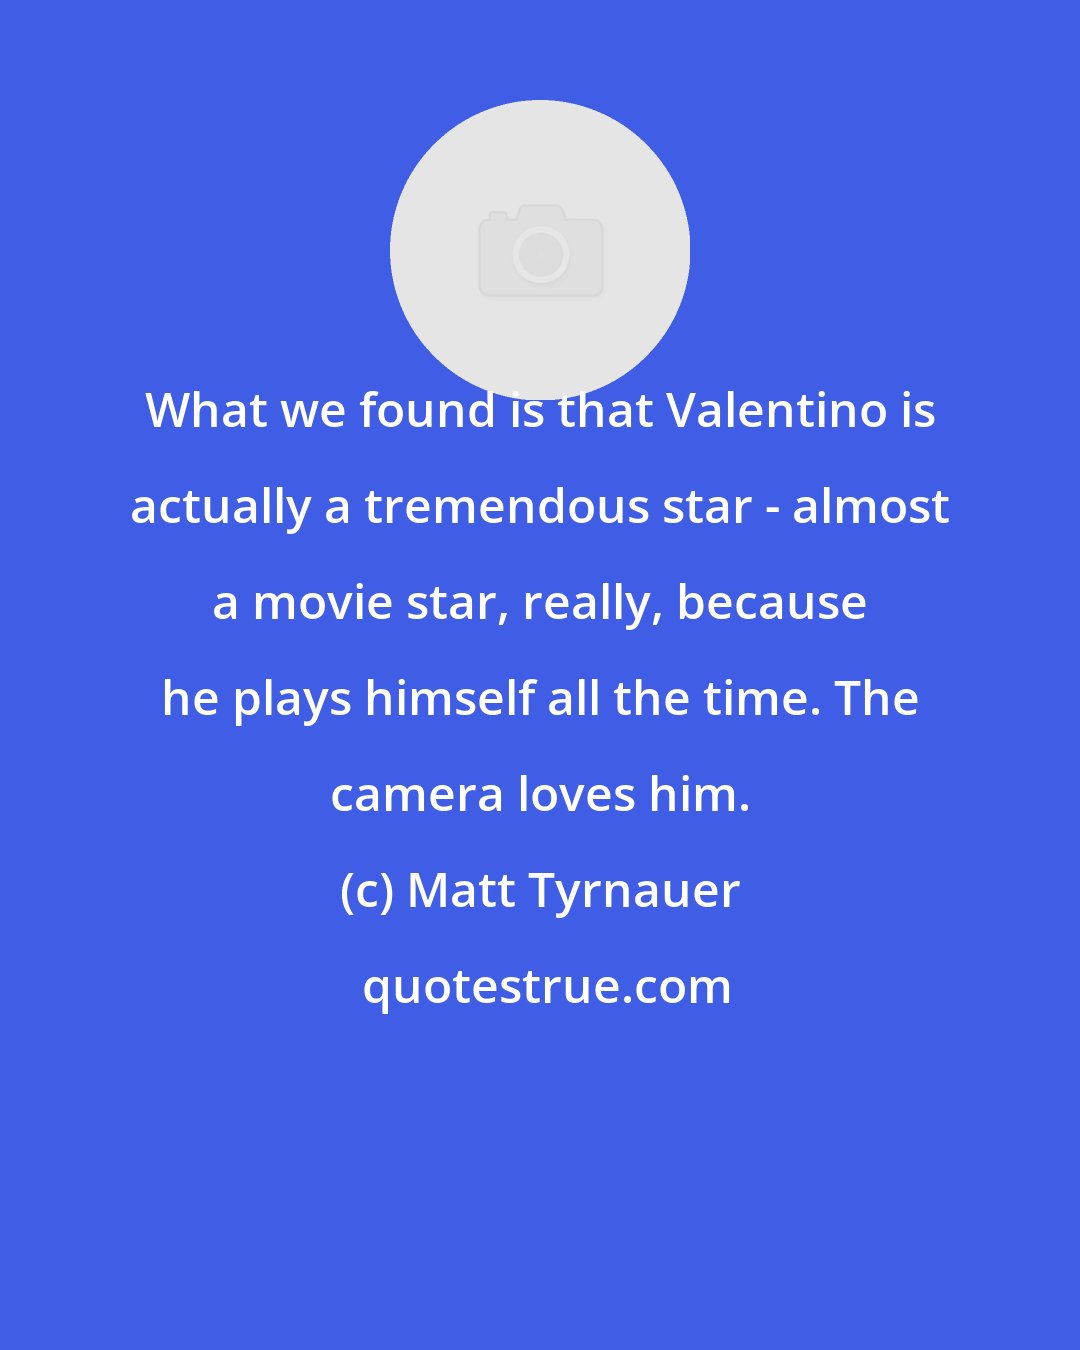 Matt Tyrnauer: What we found is that Valentino is actually a tremendous star - almost a movie star, really, because he plays himself all the time. The camera loves him.